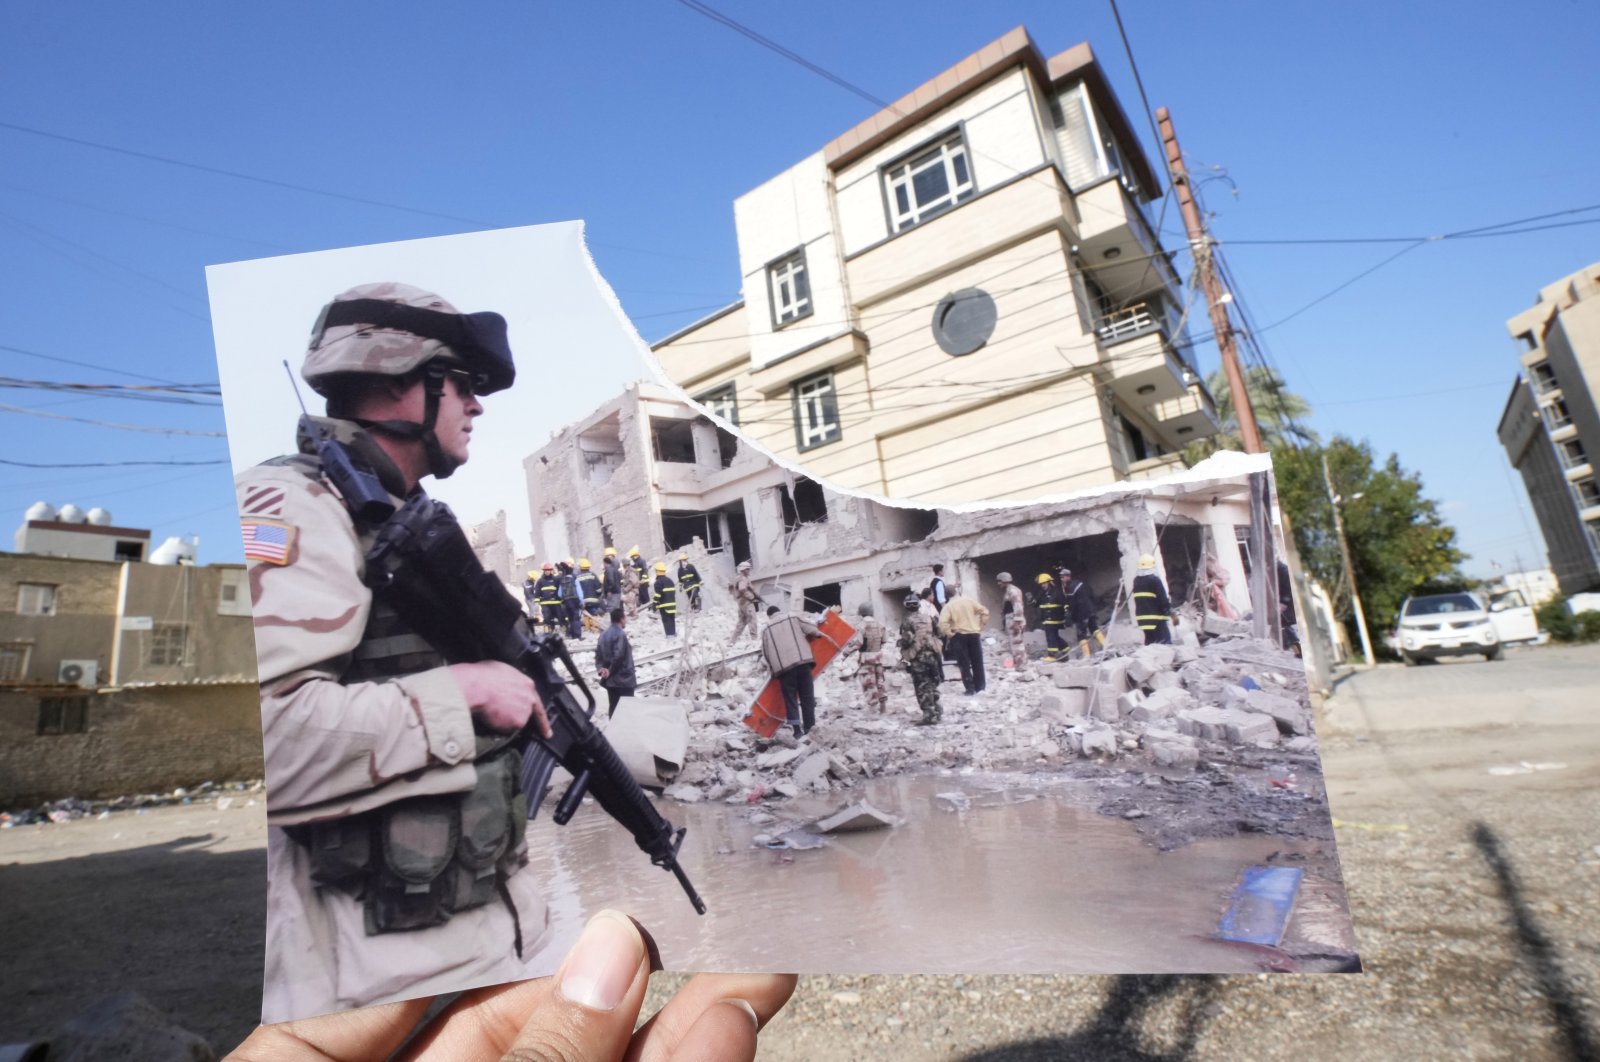 A photograph of a US soldier securing the area near a destroyed building after two car bombs detonated in a central Baghdad residential neighborhood on Nov. 18, 2005, killing at least six people and wounding dozens, is inserted into the scene at the same location, 20 years after the U.S. led invasion on Iraq and subsequent war, Baghdad, Iraq, March 10, 2023. (AP Photo)